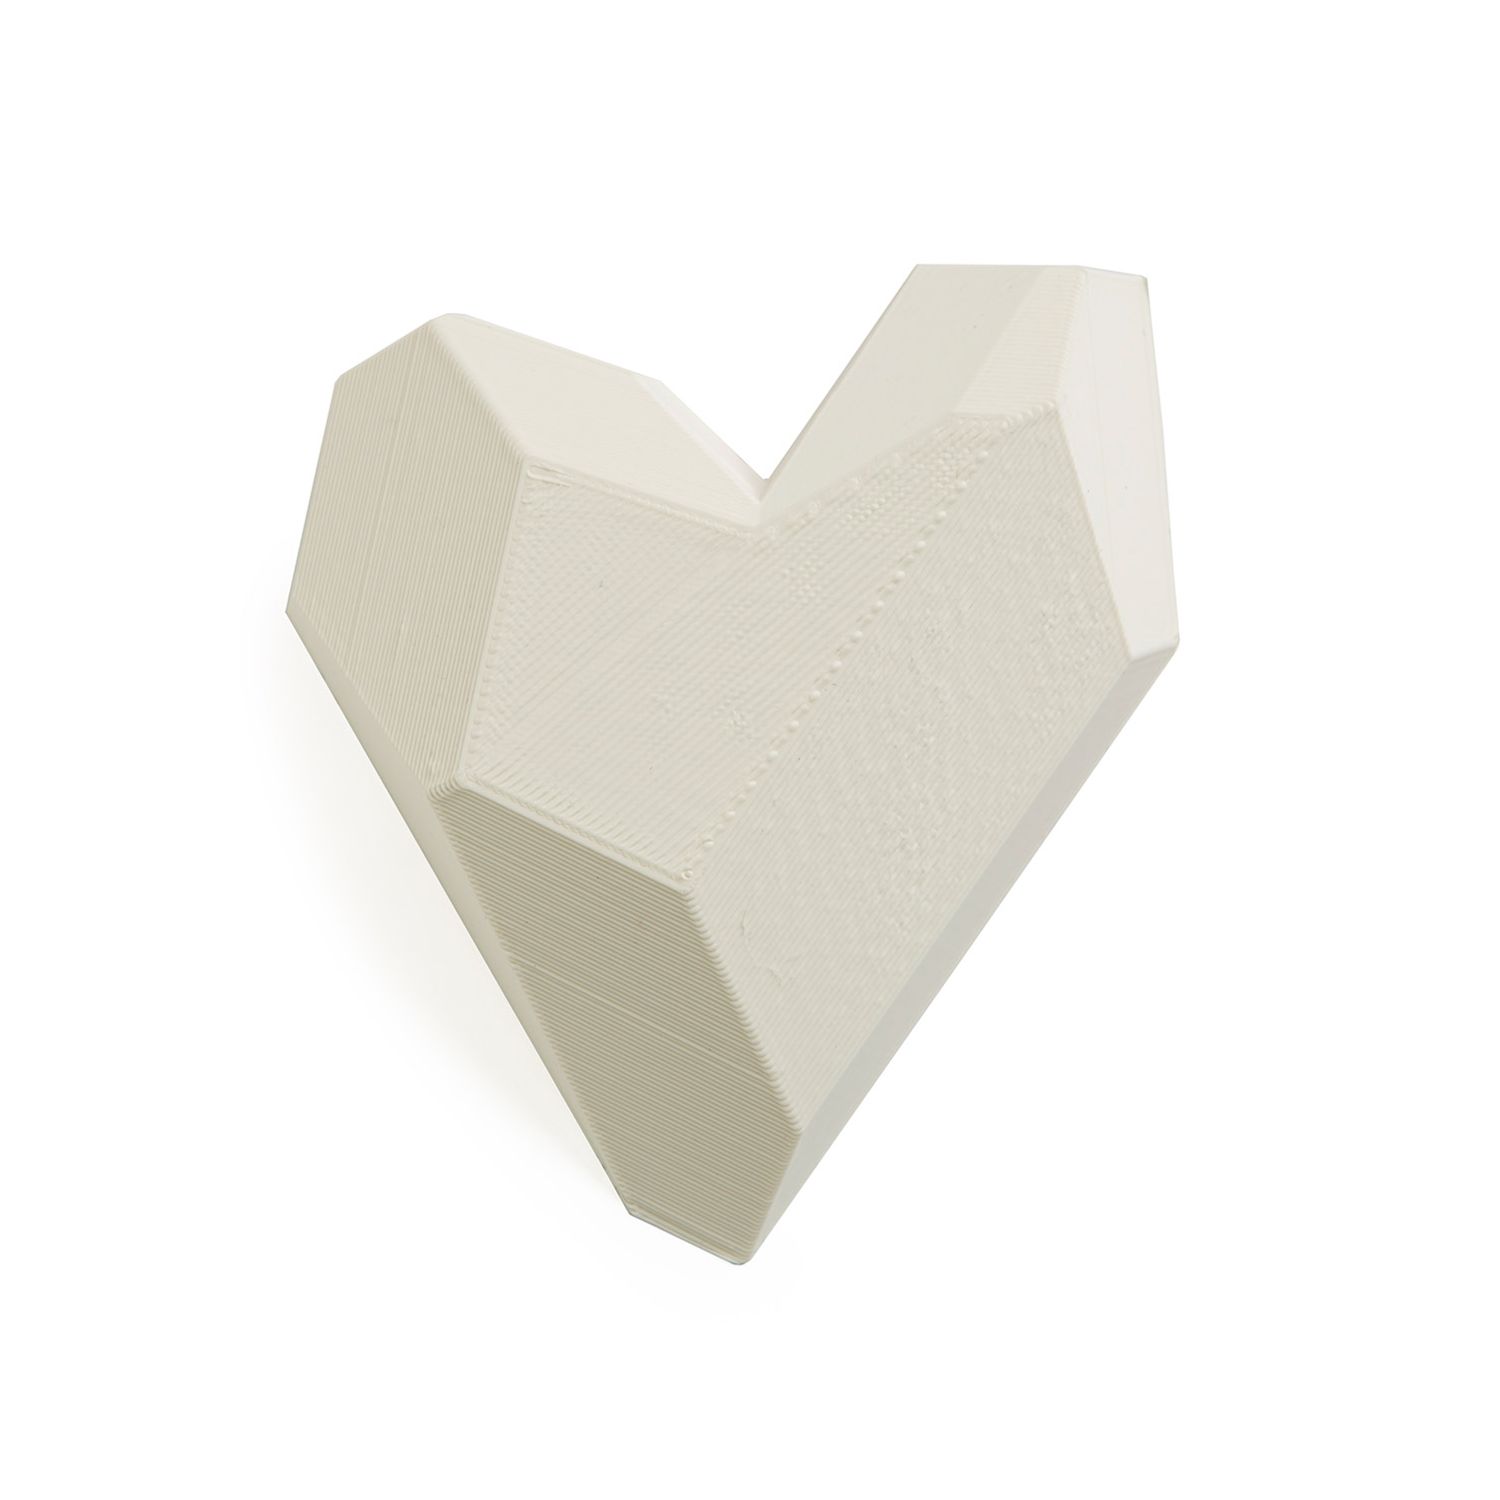 Maison 203: Heart Brooch – White Product Image 1 of 3